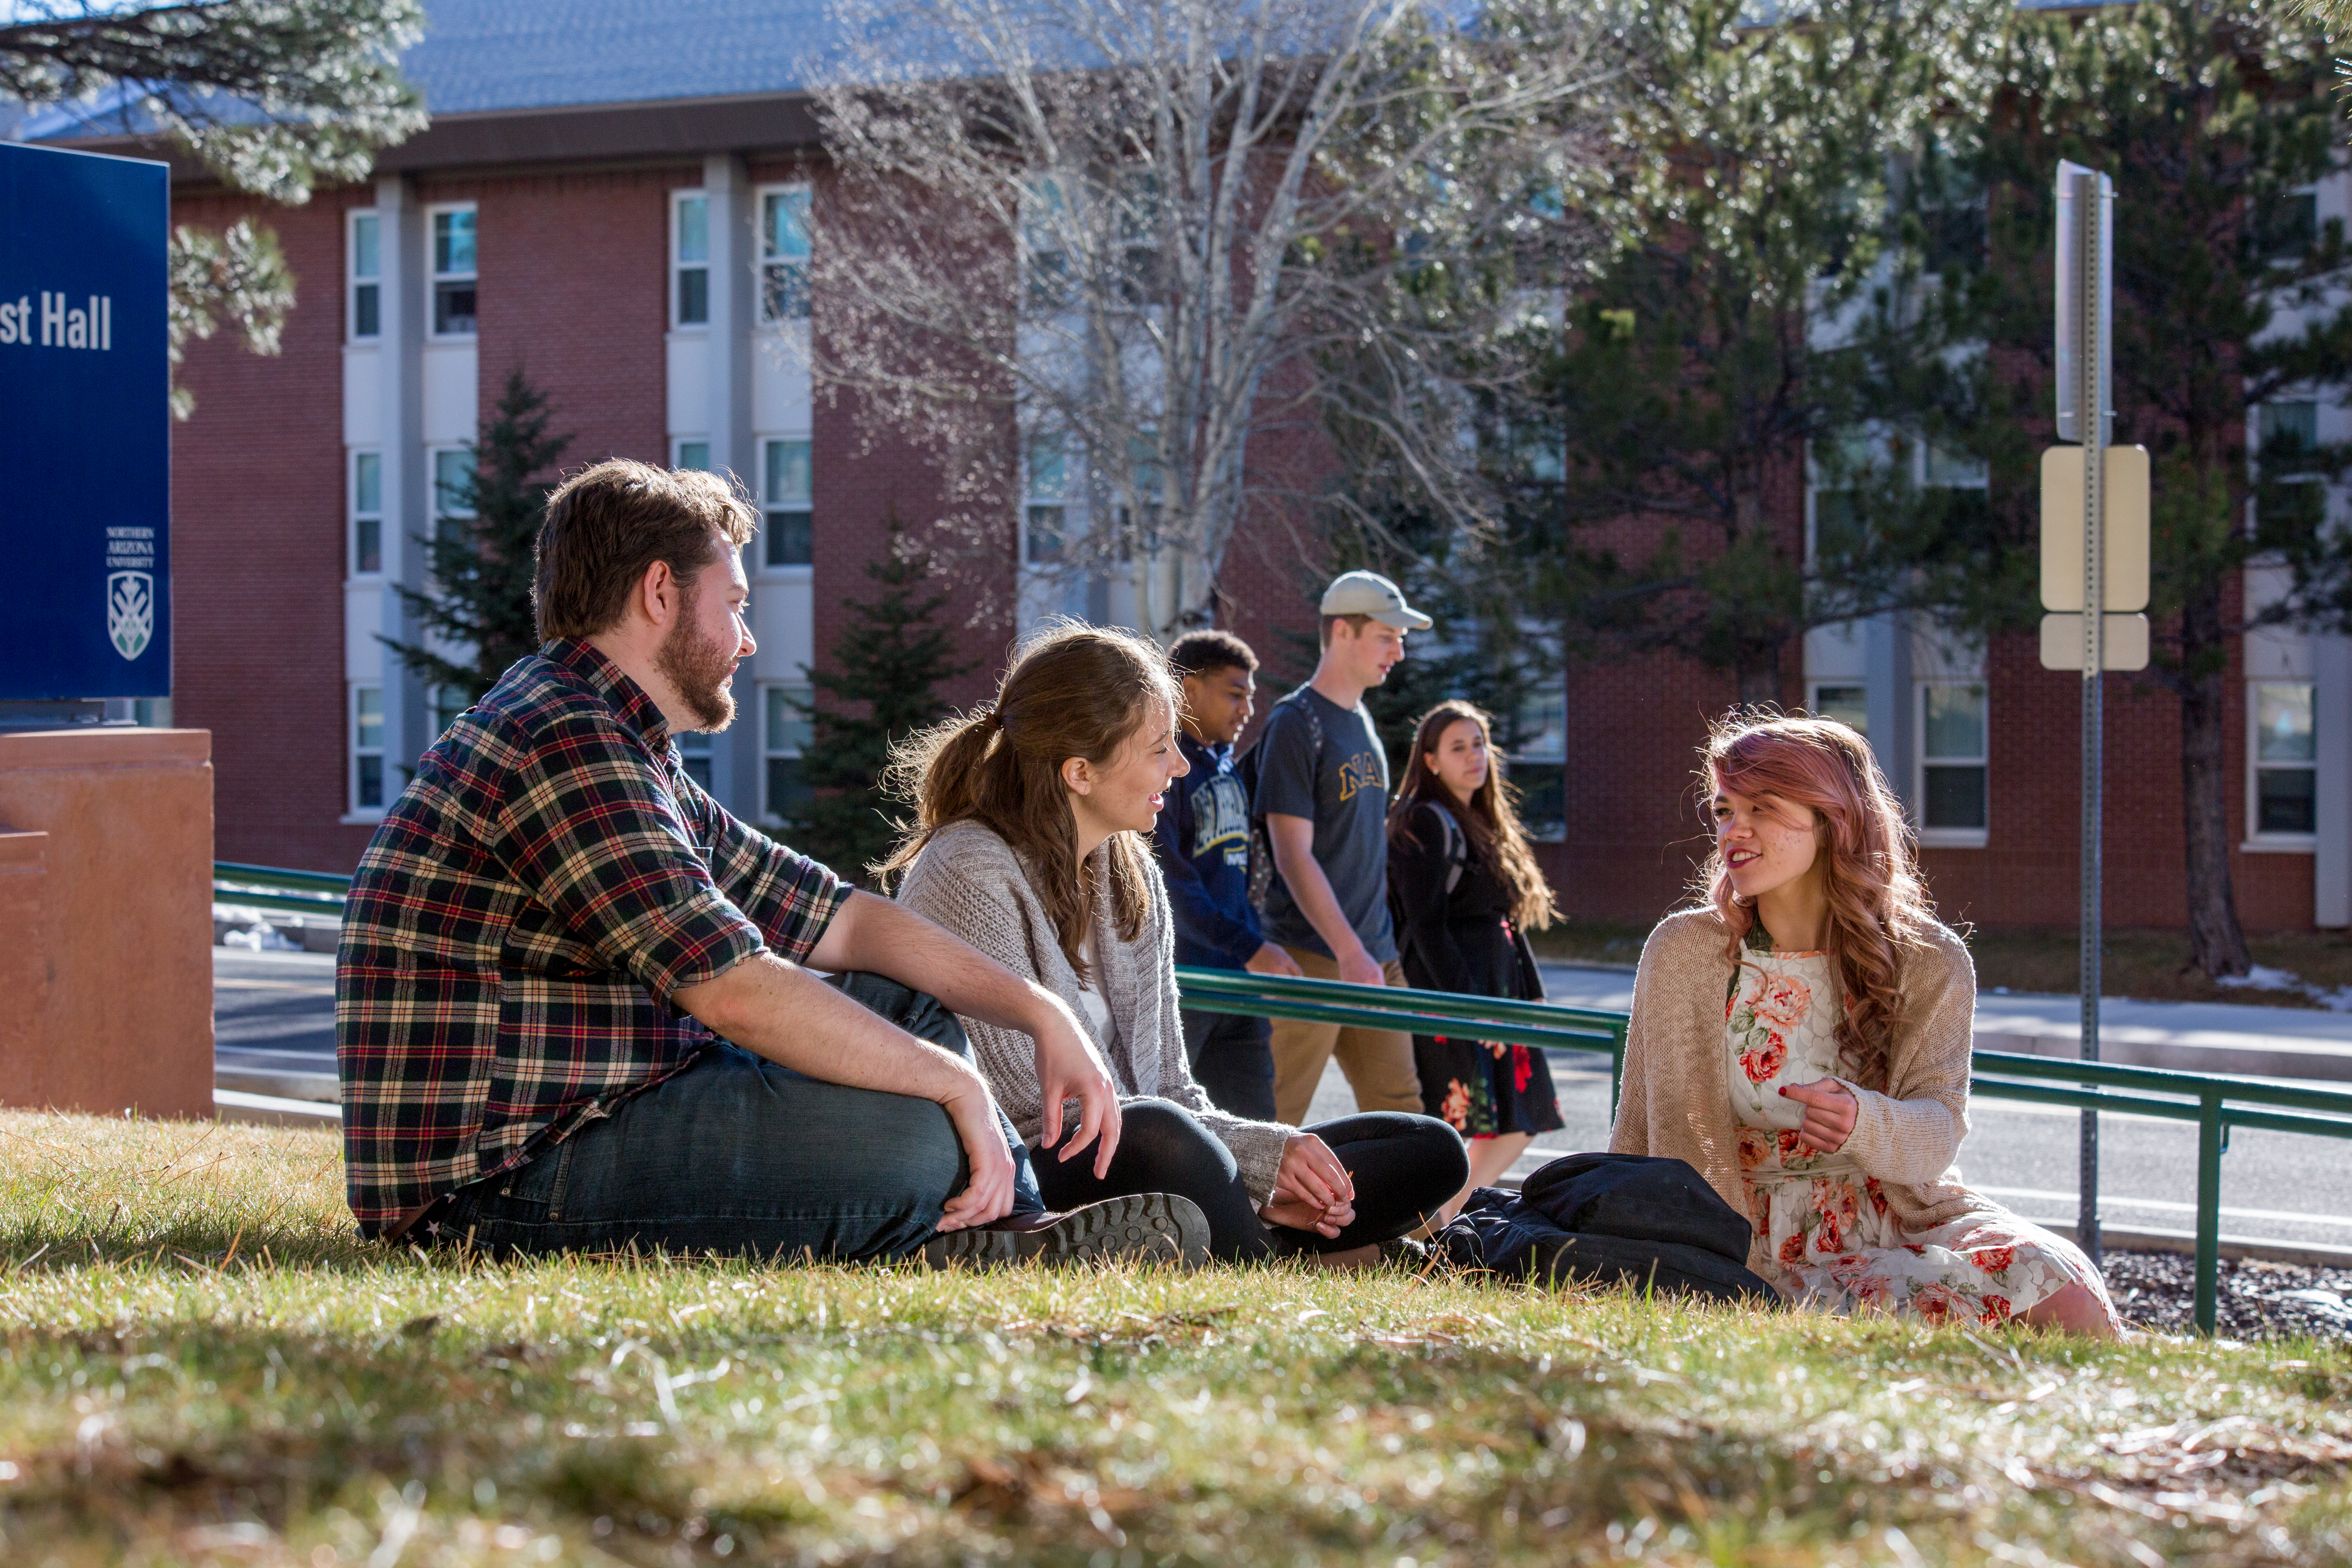 Students talking outside while sitting in the grass.